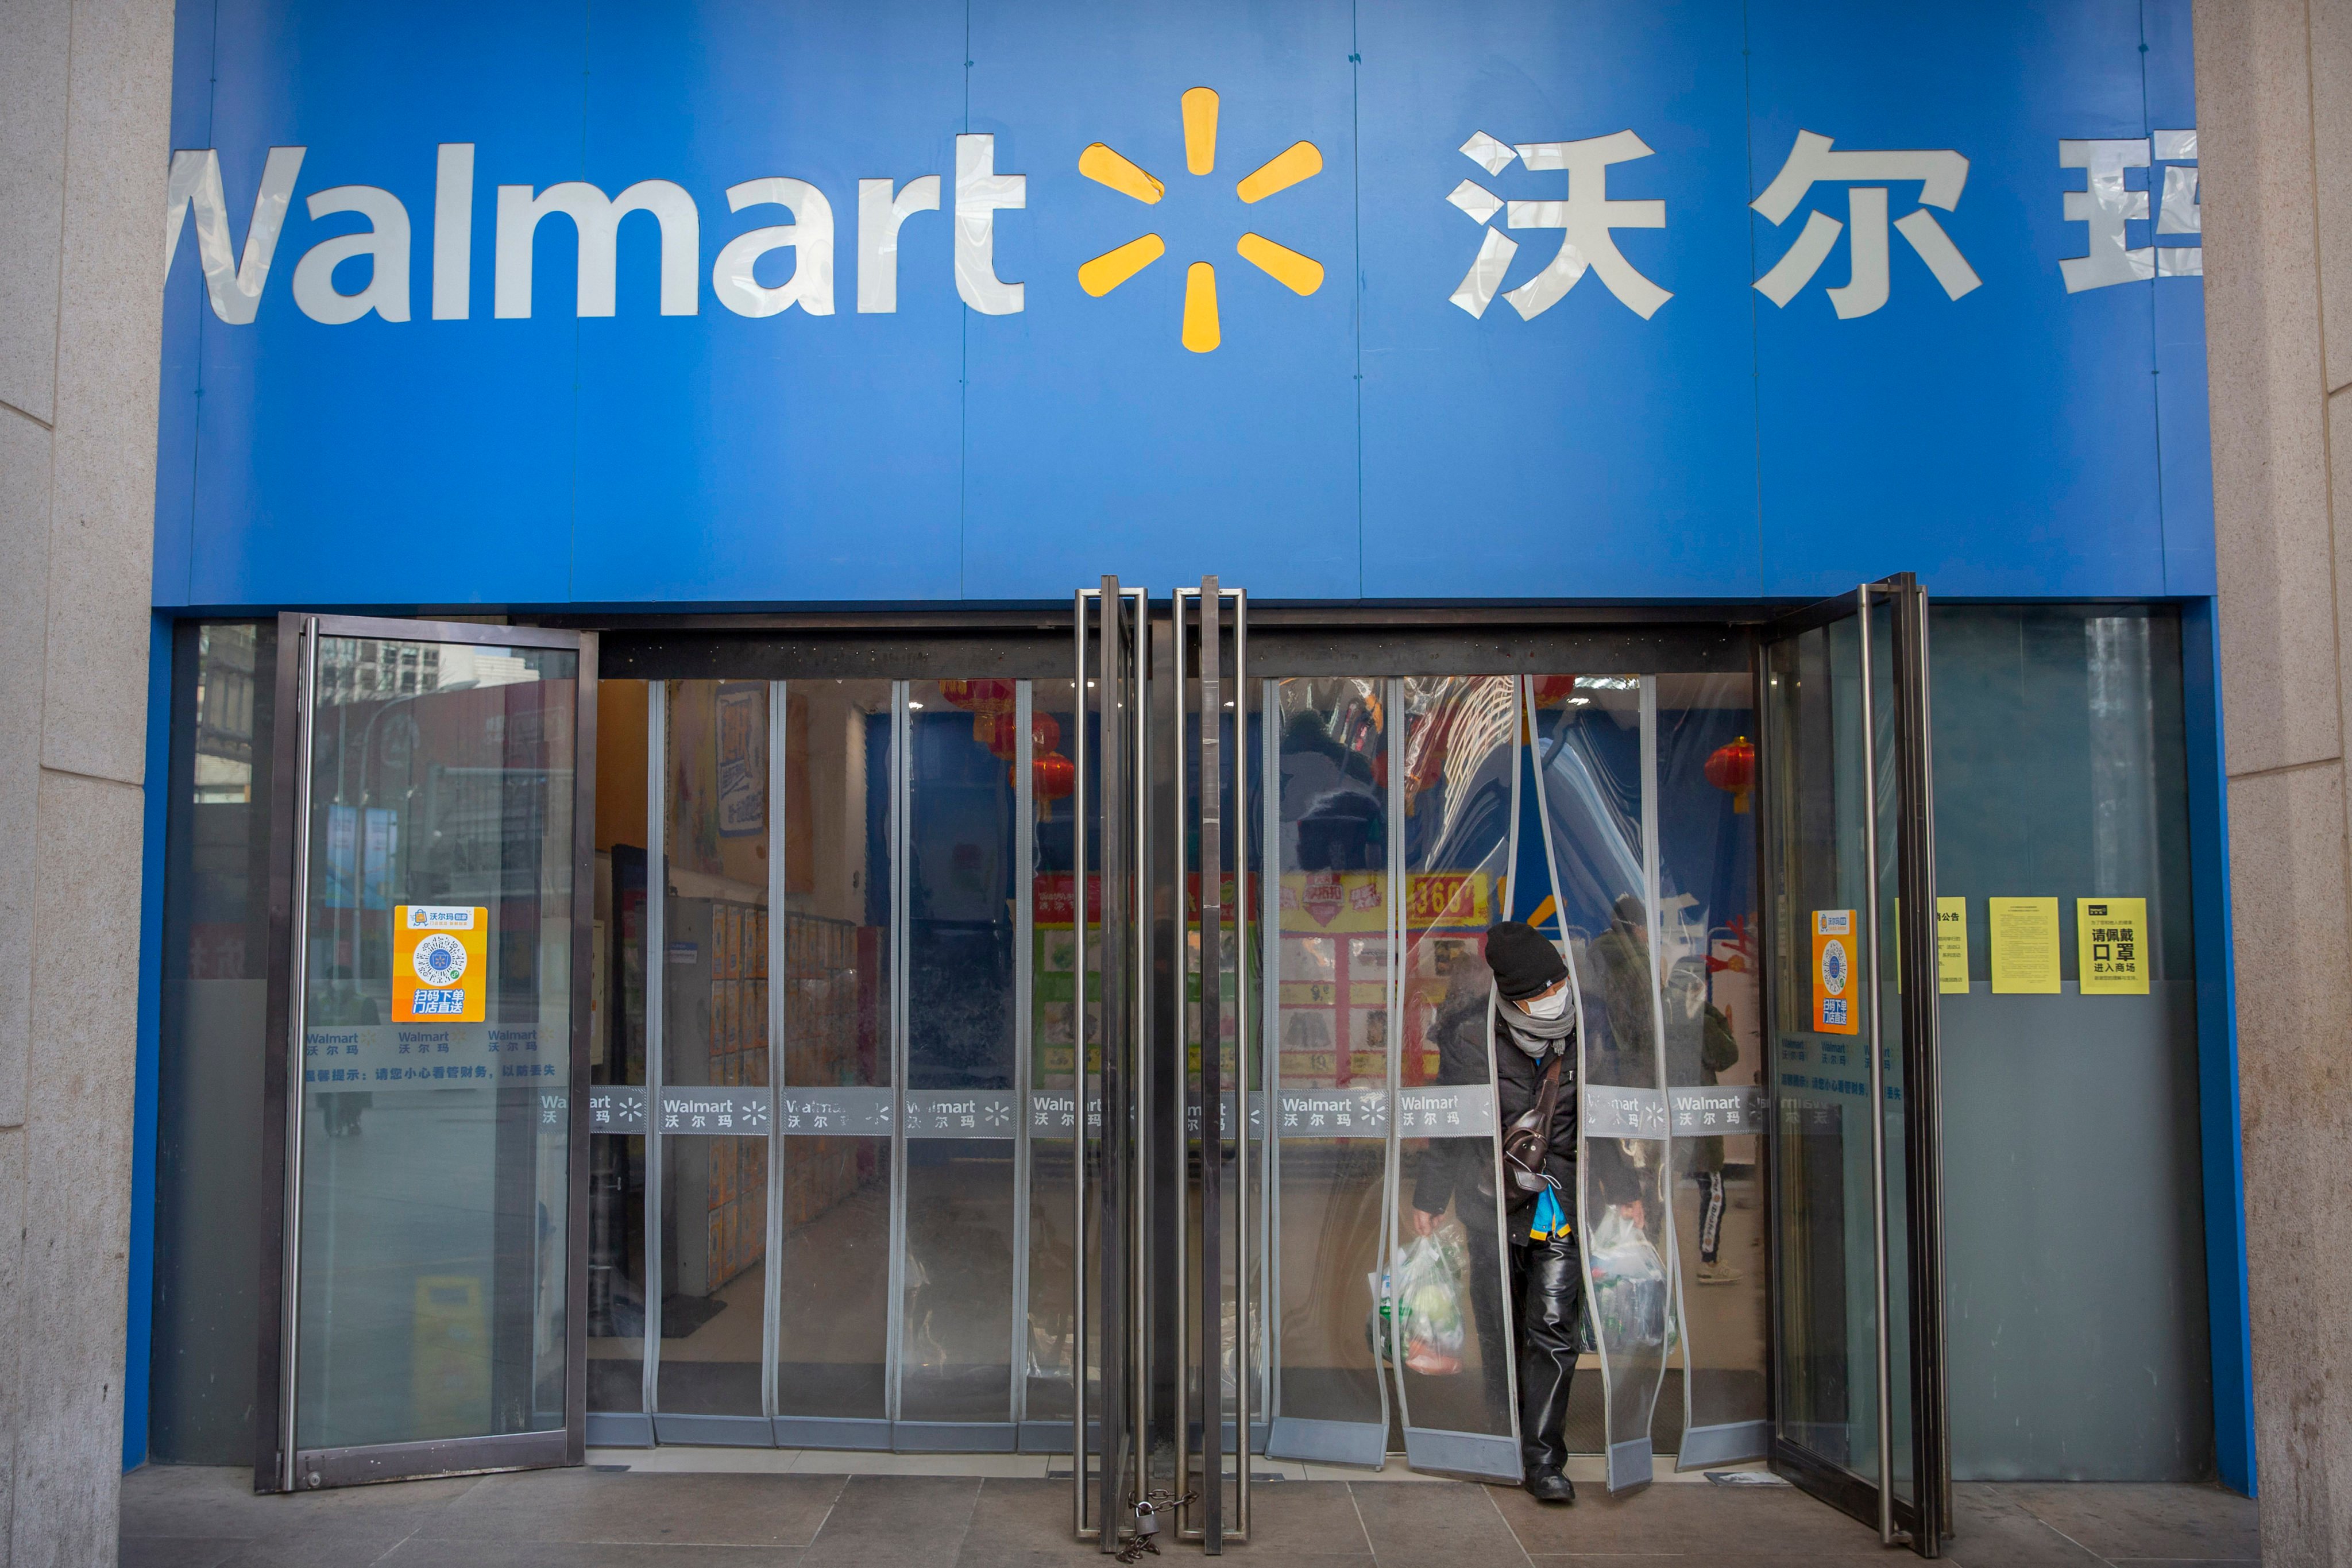 A woman wearing a mask is pictured at a Walmart grocery store in Beijing. In a statement on its website, China’s CCDI accused Sam’s Club of boycotting Xinjiang products. Photo: AP